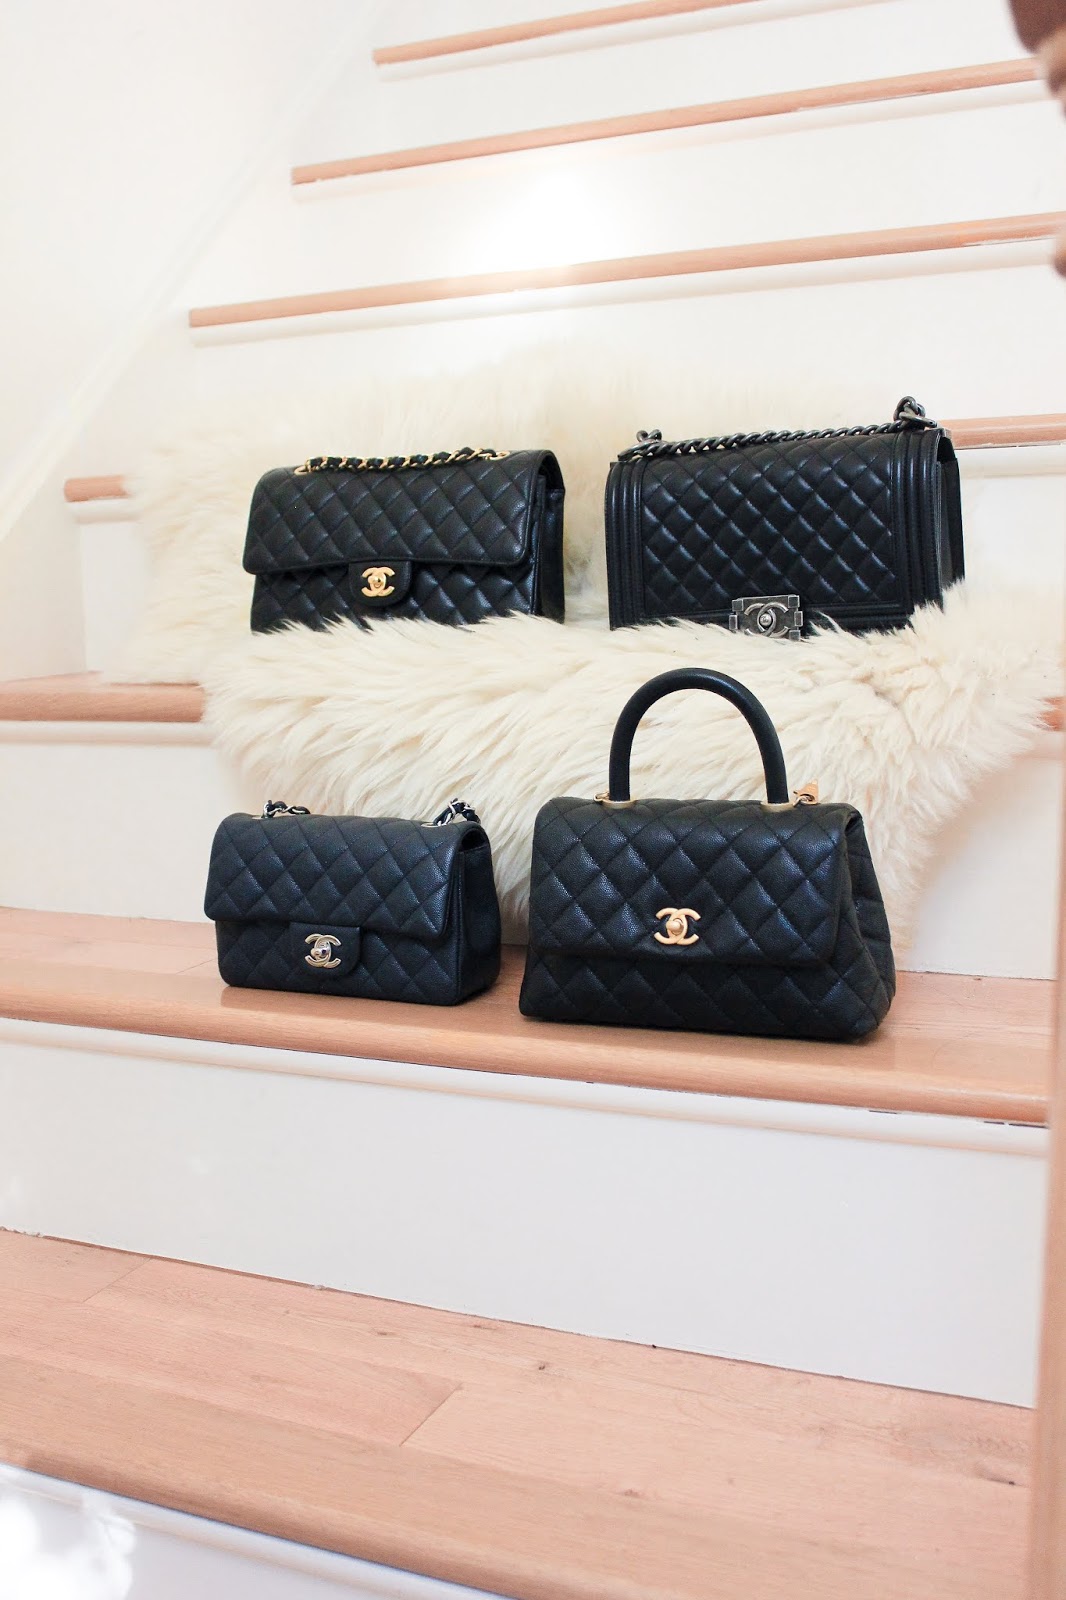 Chanel Classics Collection: Most Used, 2020 Price Increase, and If